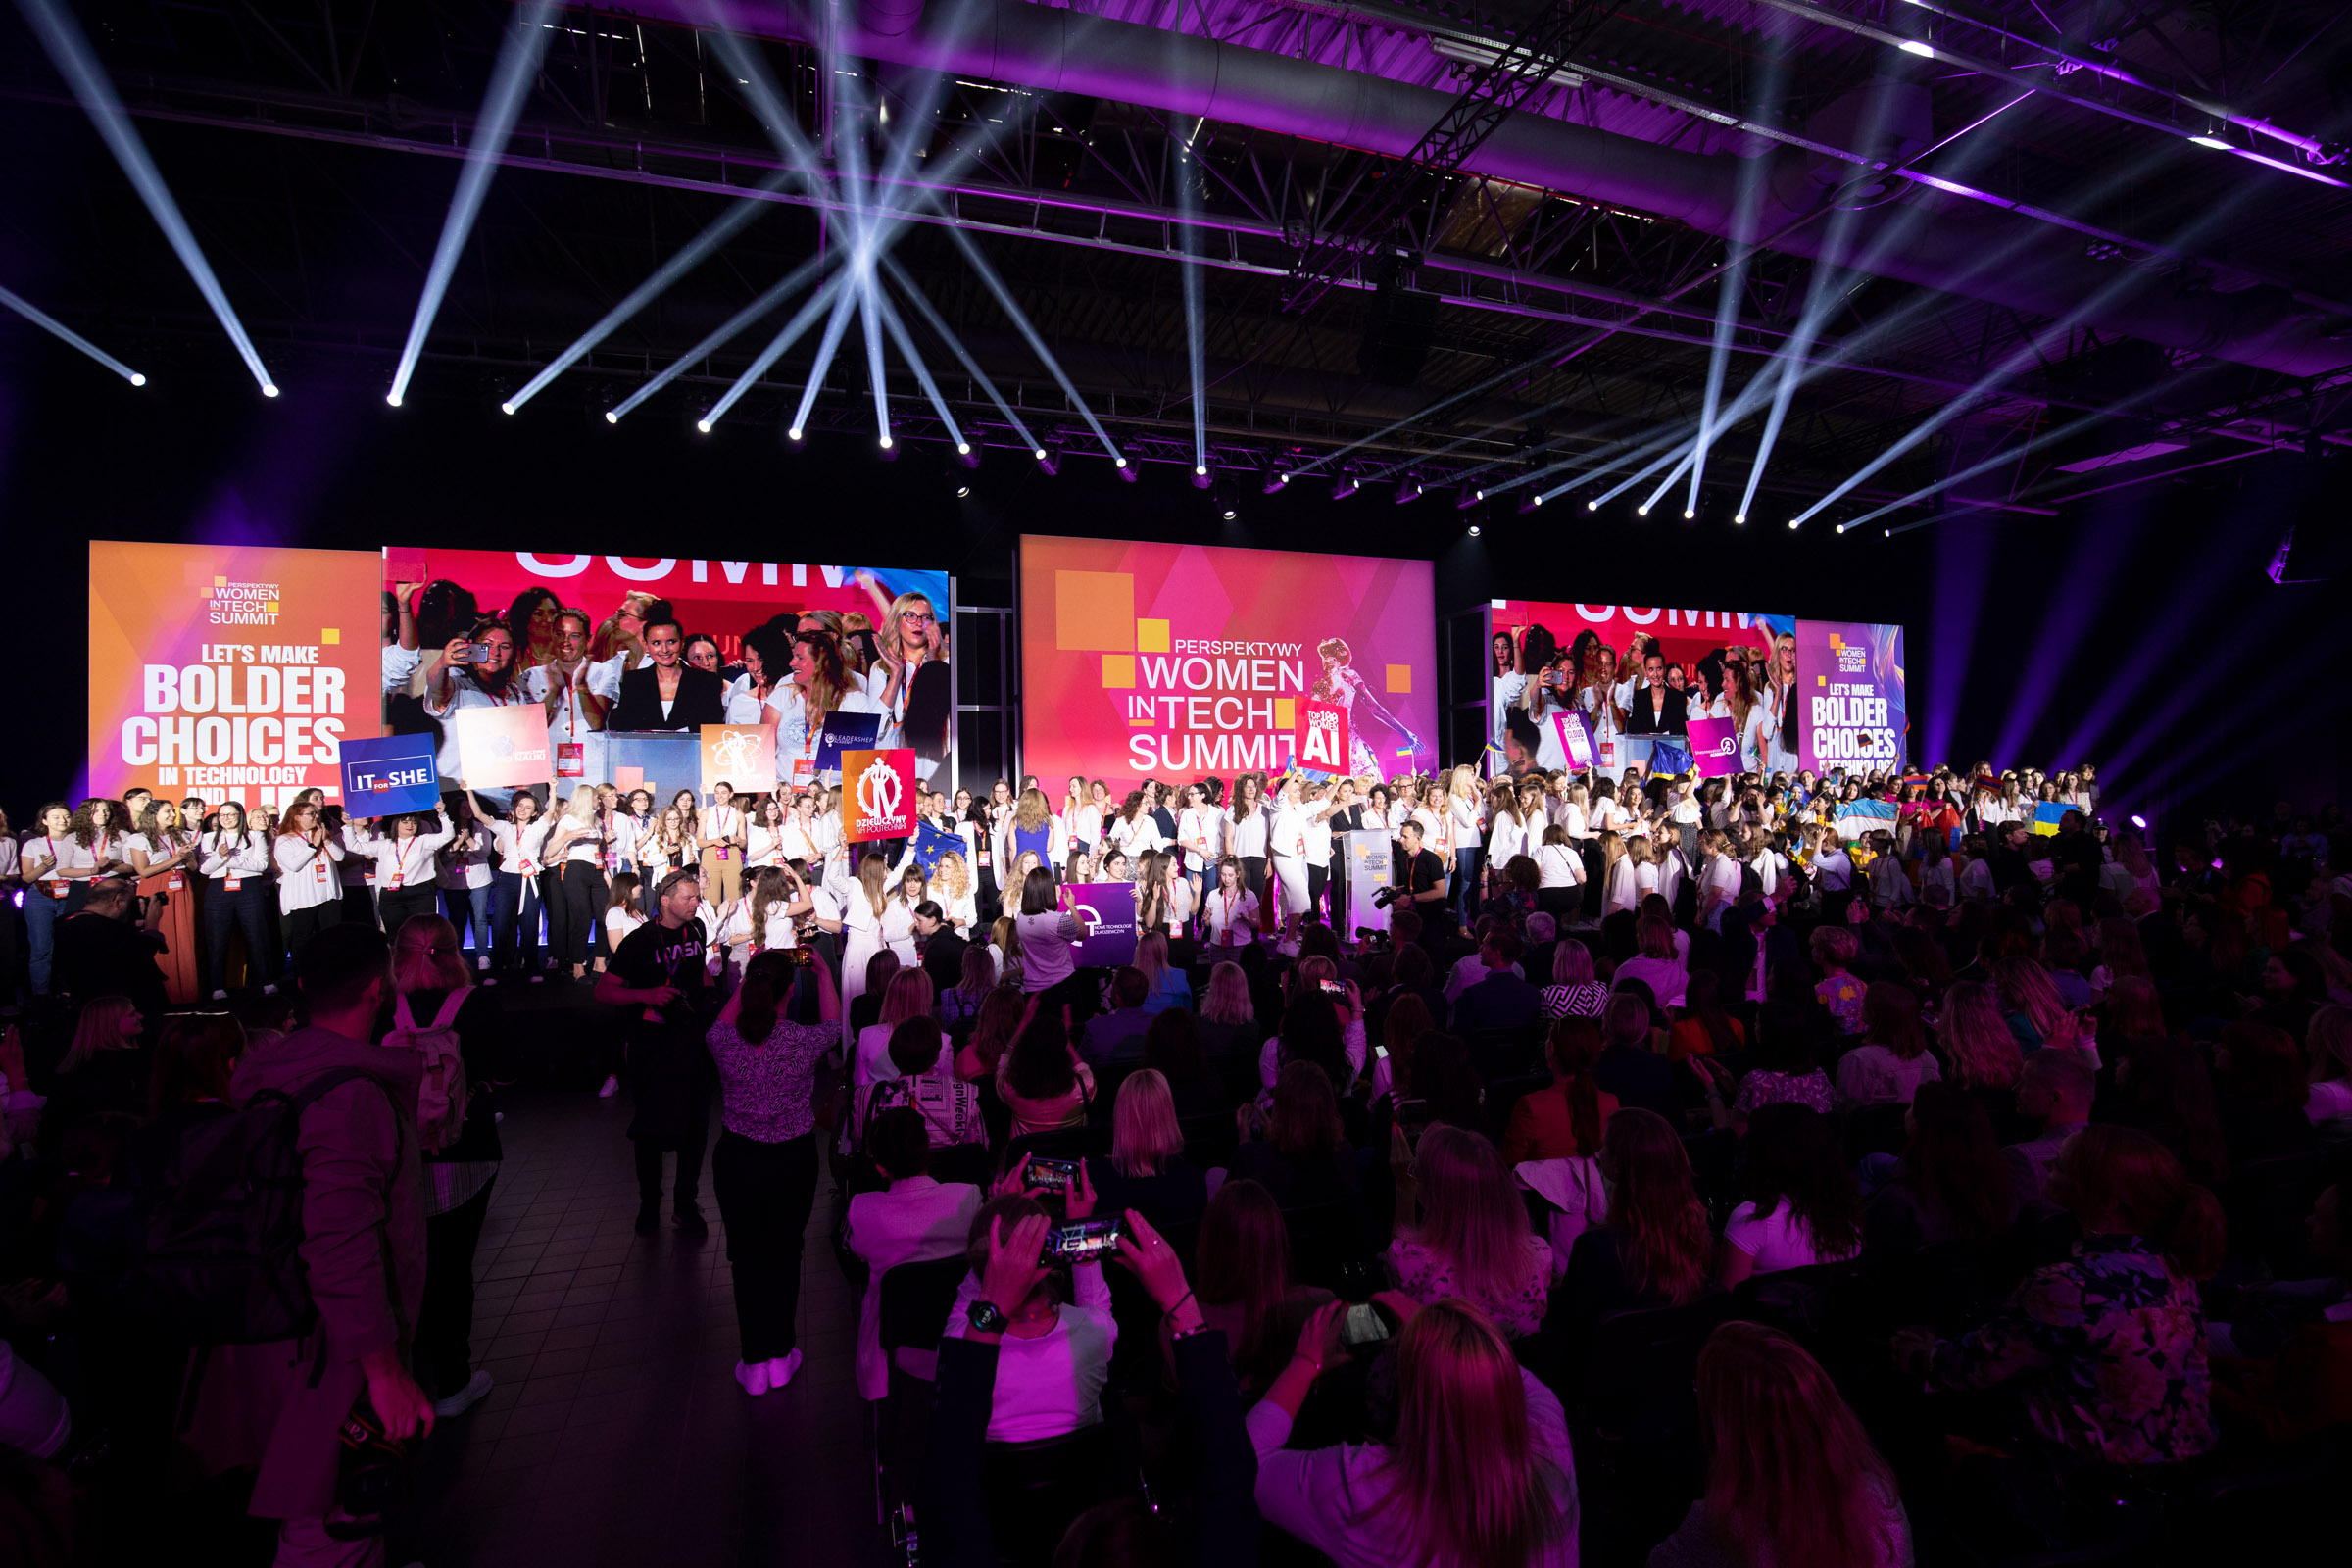 Perspektywy Women in Tech Summit: Polytechnic female professors and a student join the largest event in Europe for women in technology and IT